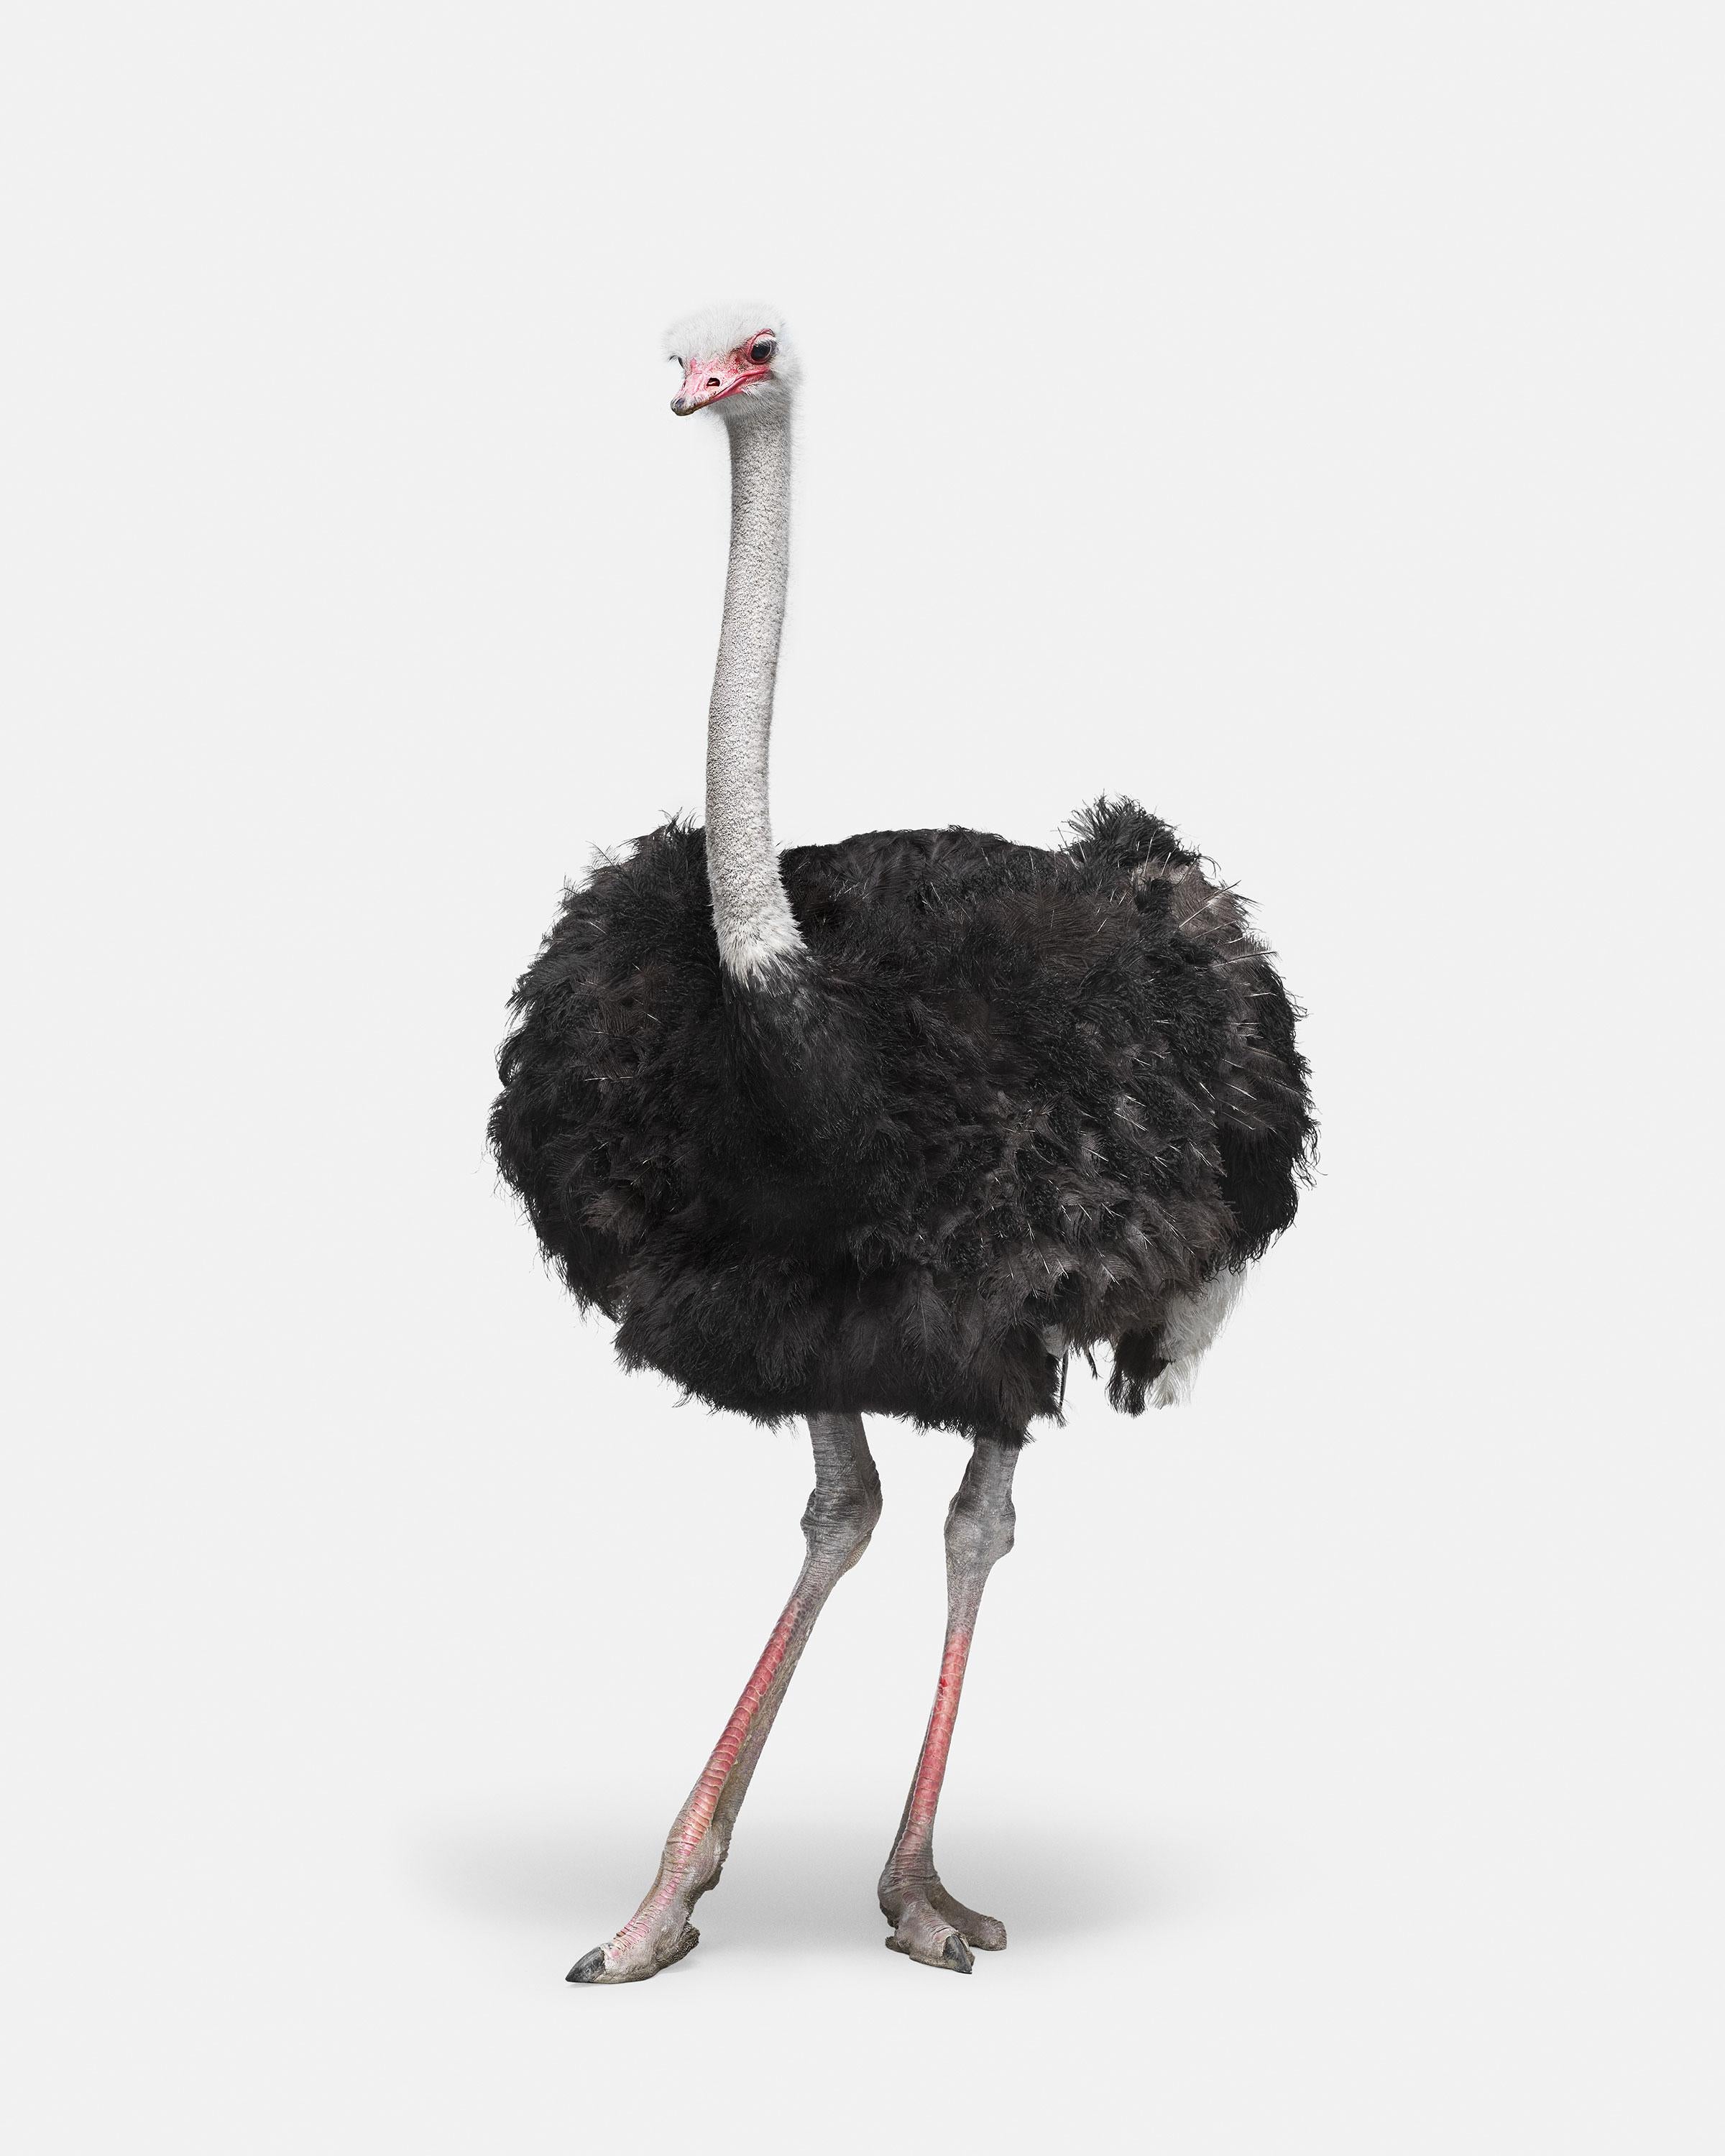 Randal Ford - Ostrich n° 1, photographie 2018